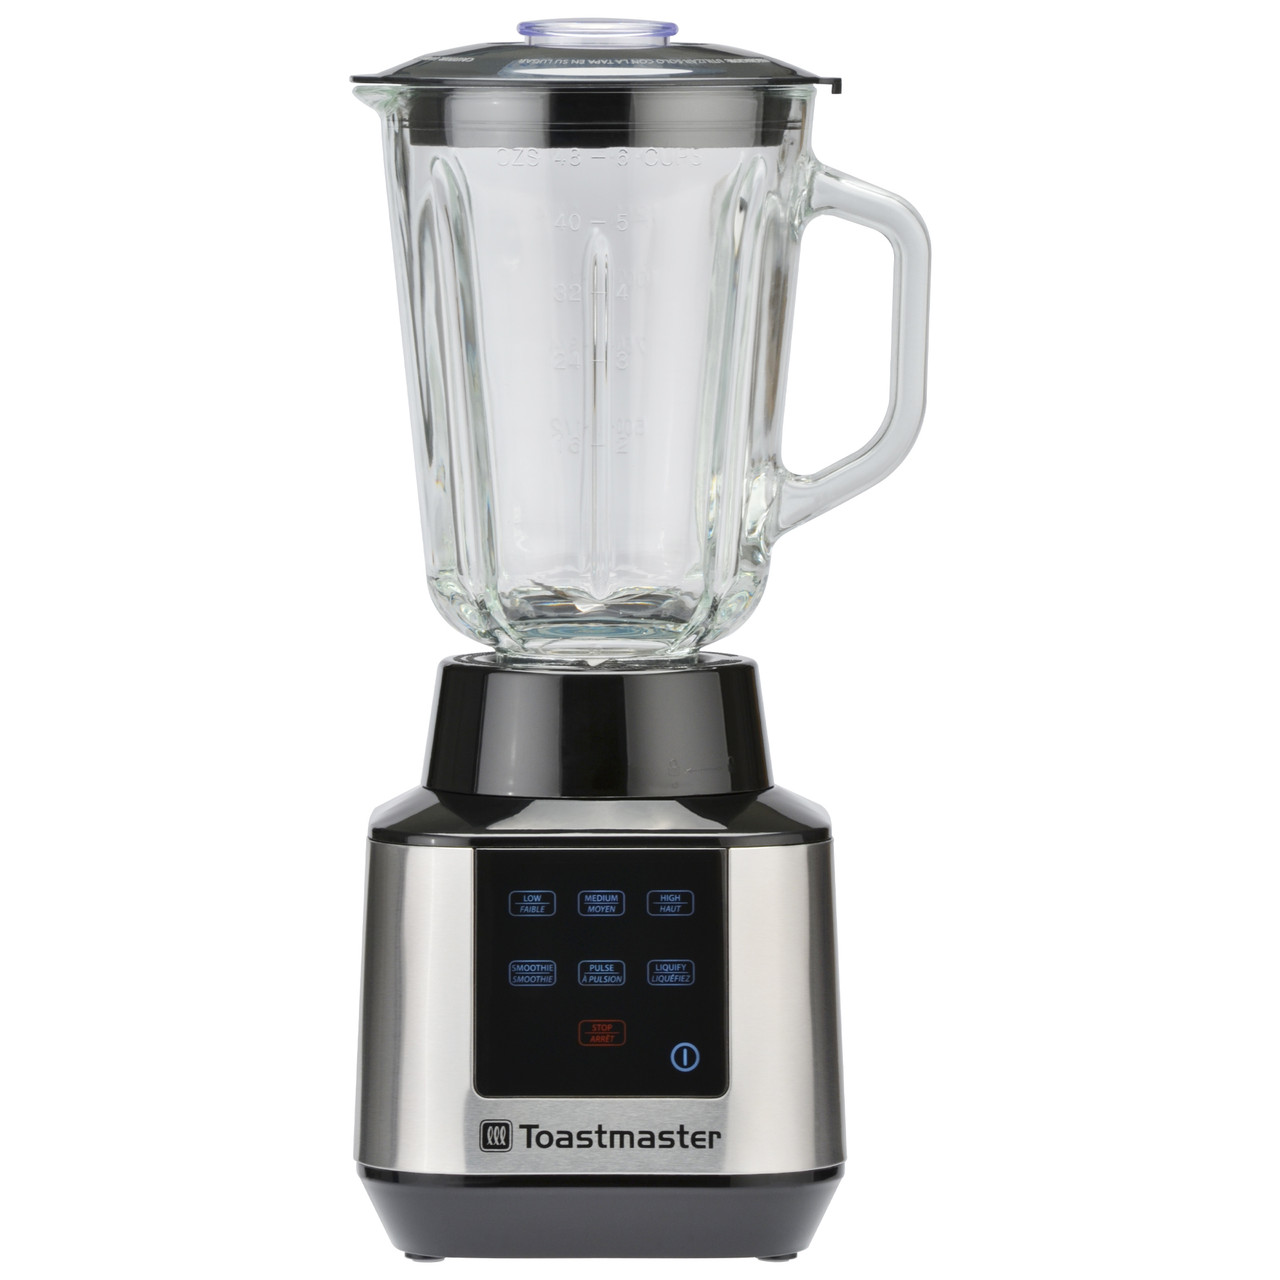 Toastmaster Personal Blender 15oz Capacity Stainless Steel Blades One Touch